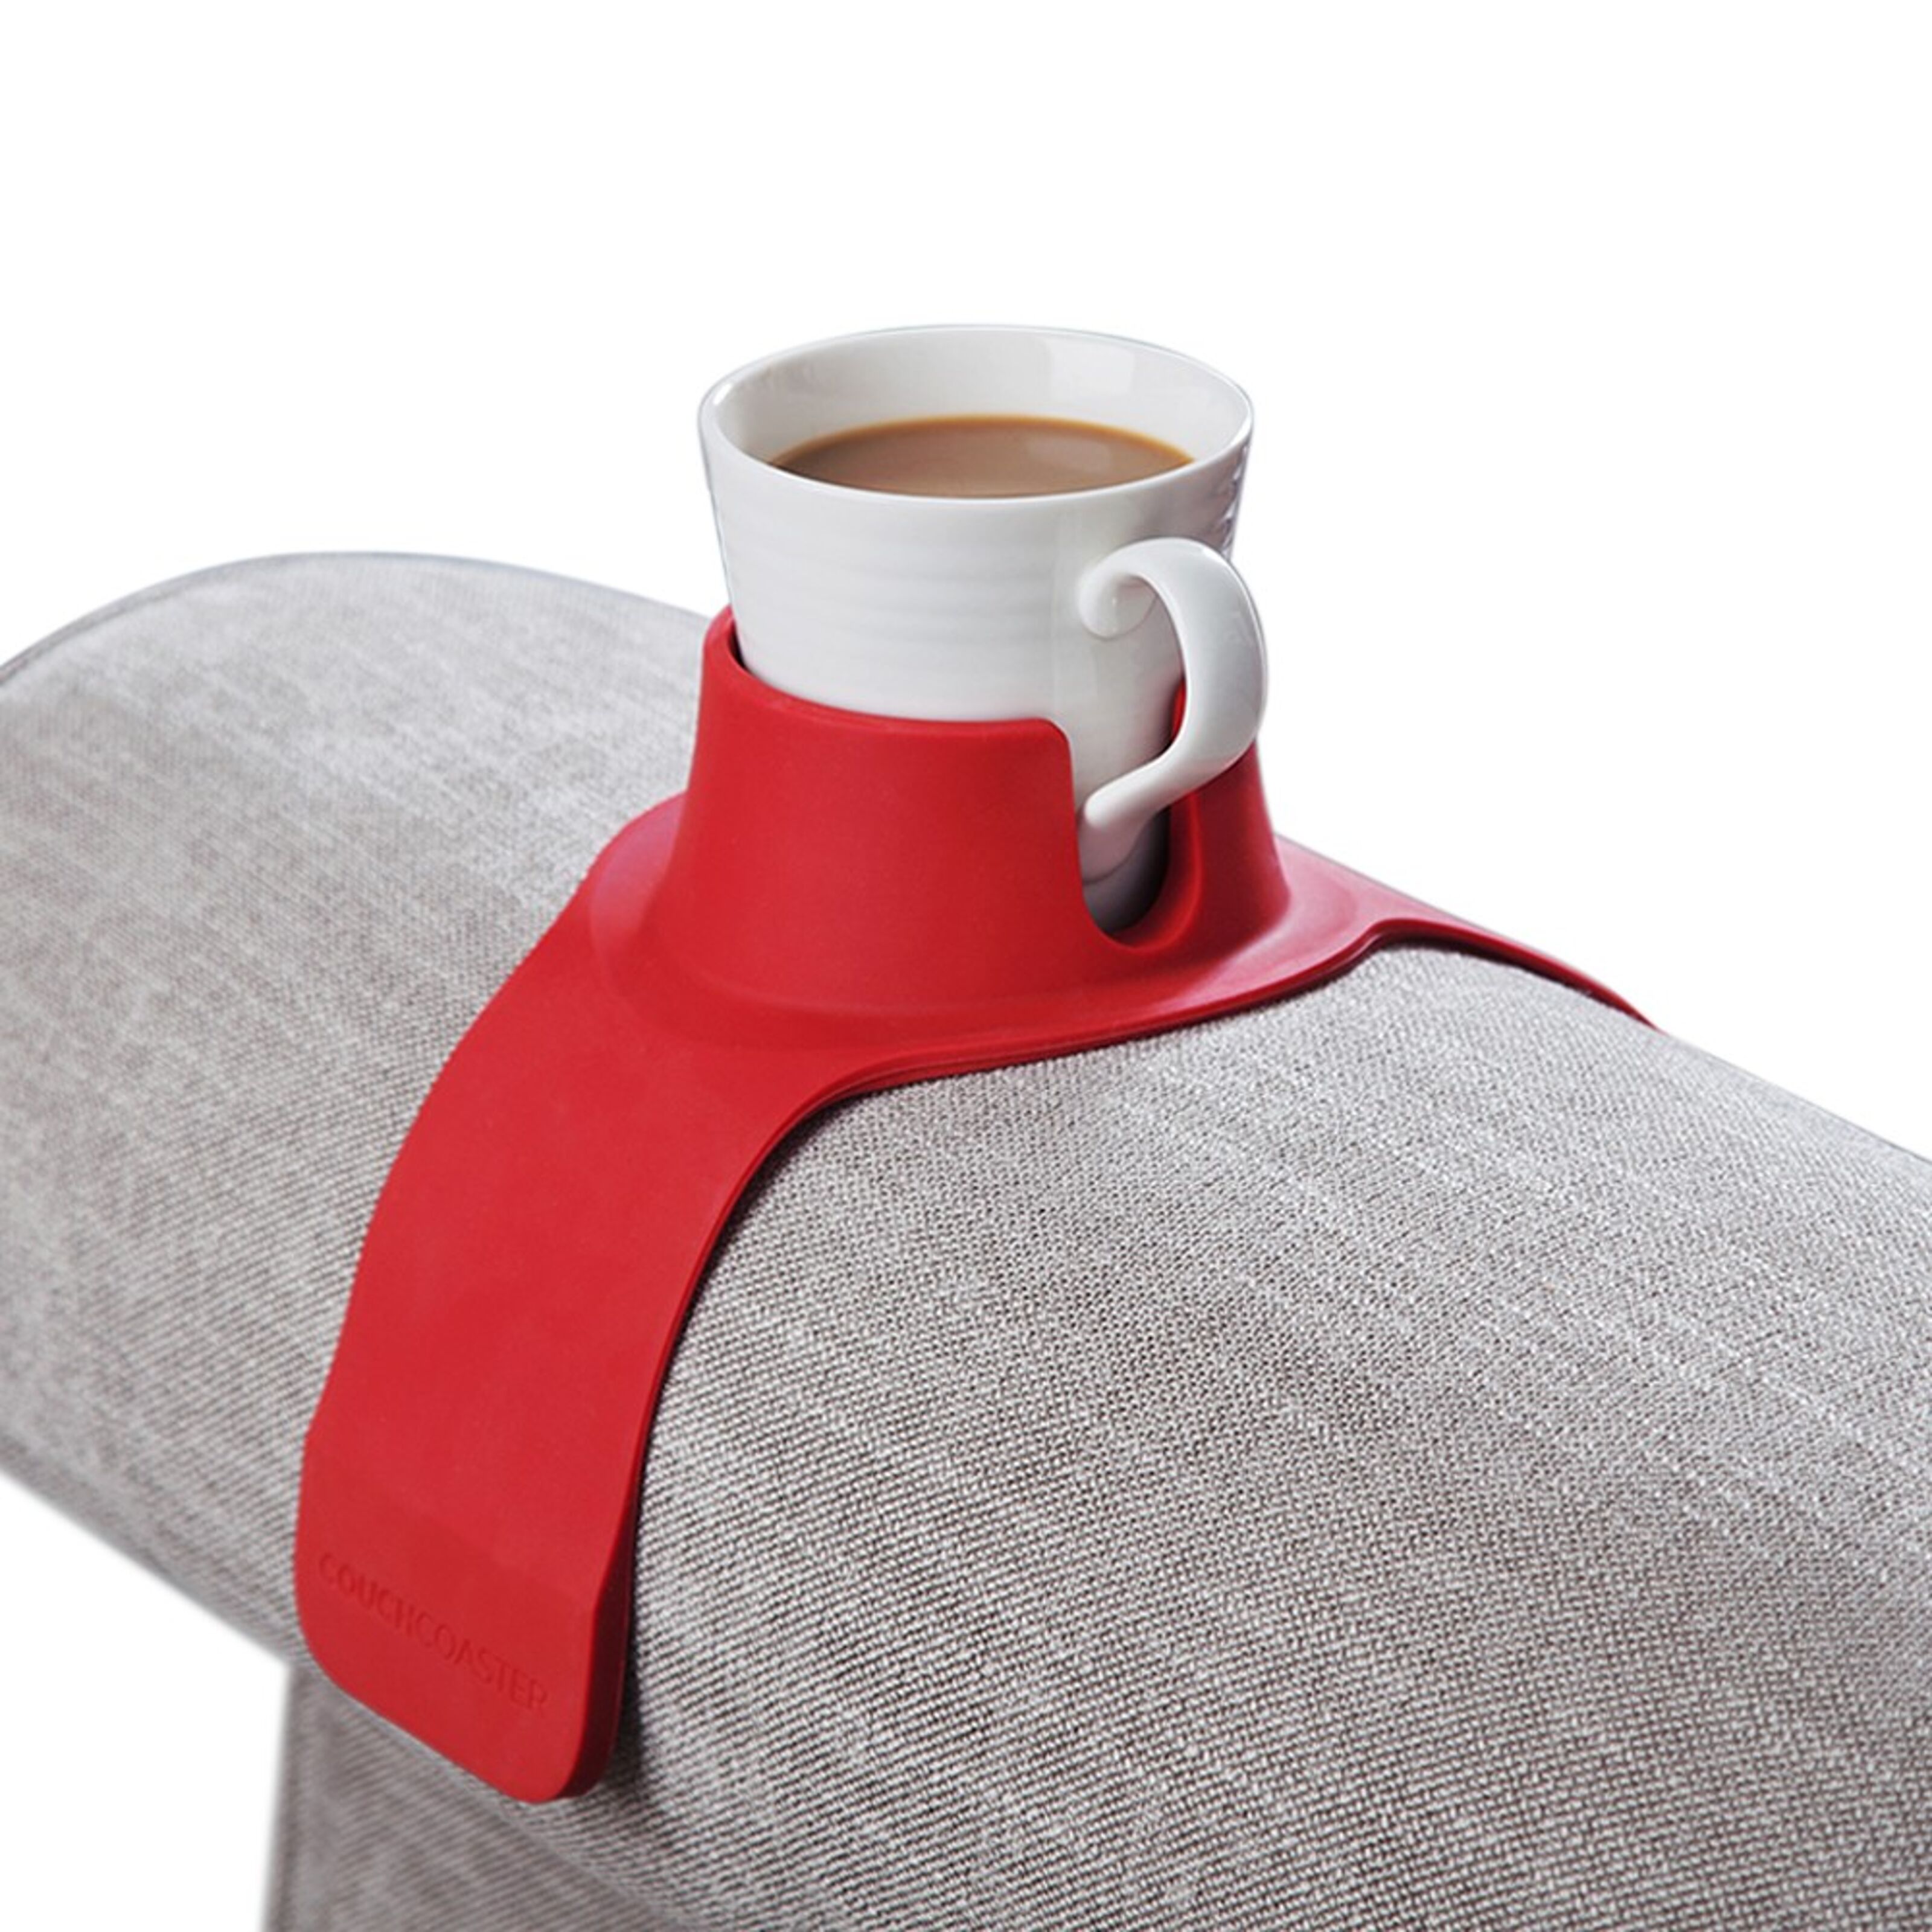 TableCoaster - Ultimate Anti-Spill Drink Holder